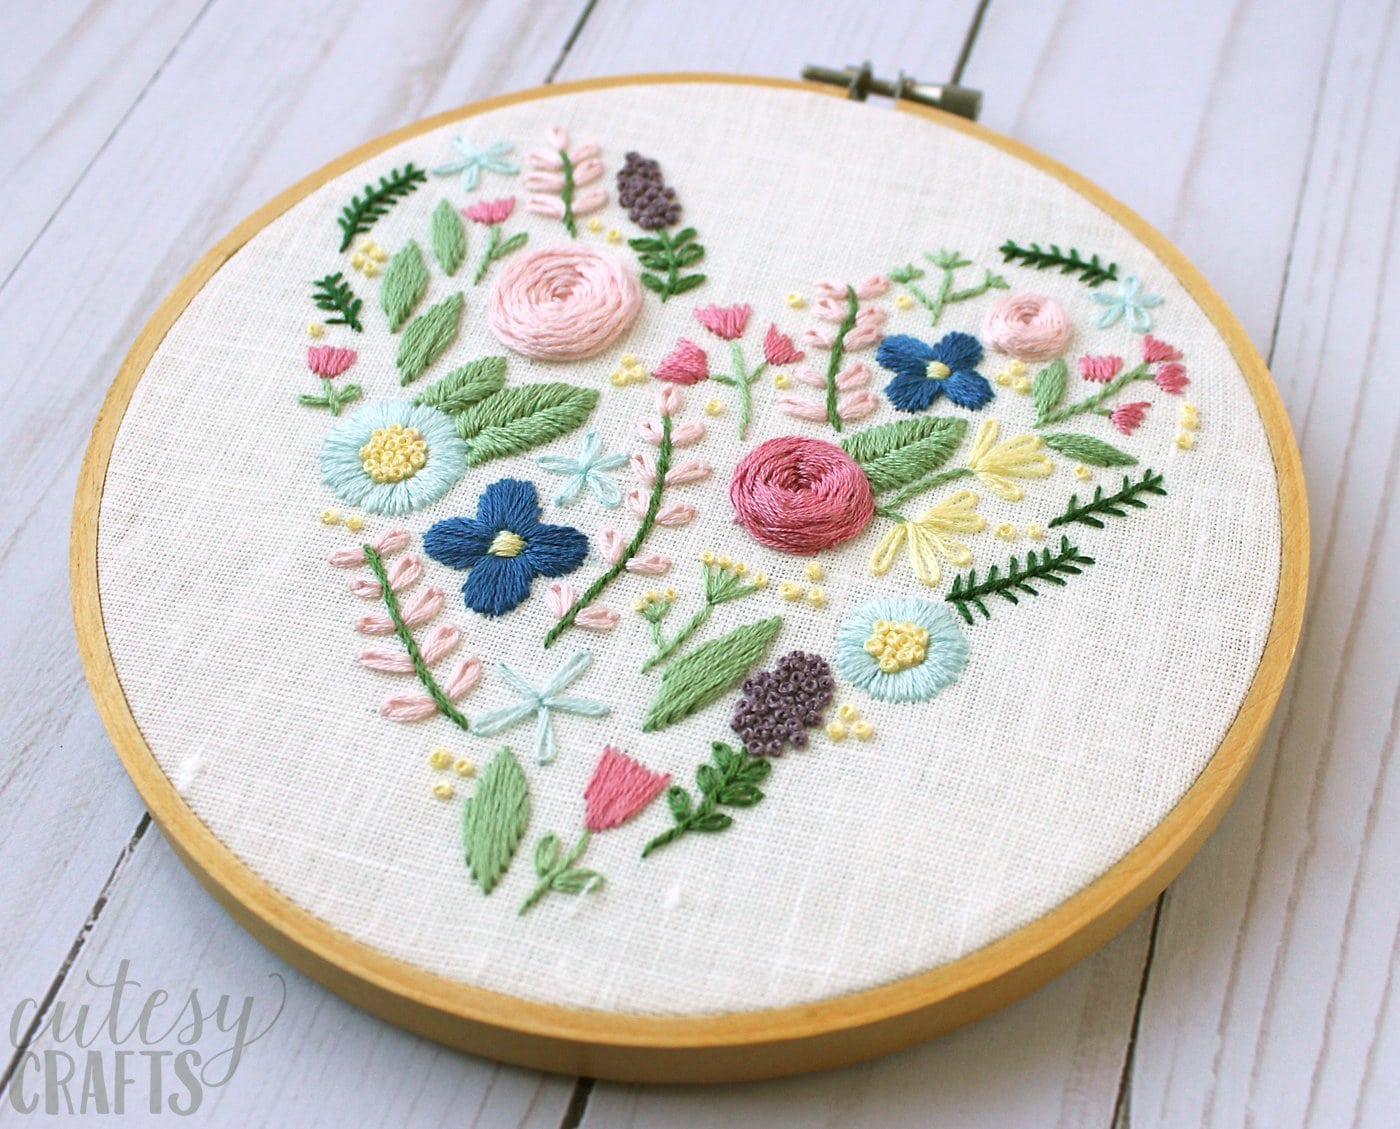 Hand Embroidery Flowers Patterns Floral Heart Hand Embroidery Pattern The Polka Dot Chair